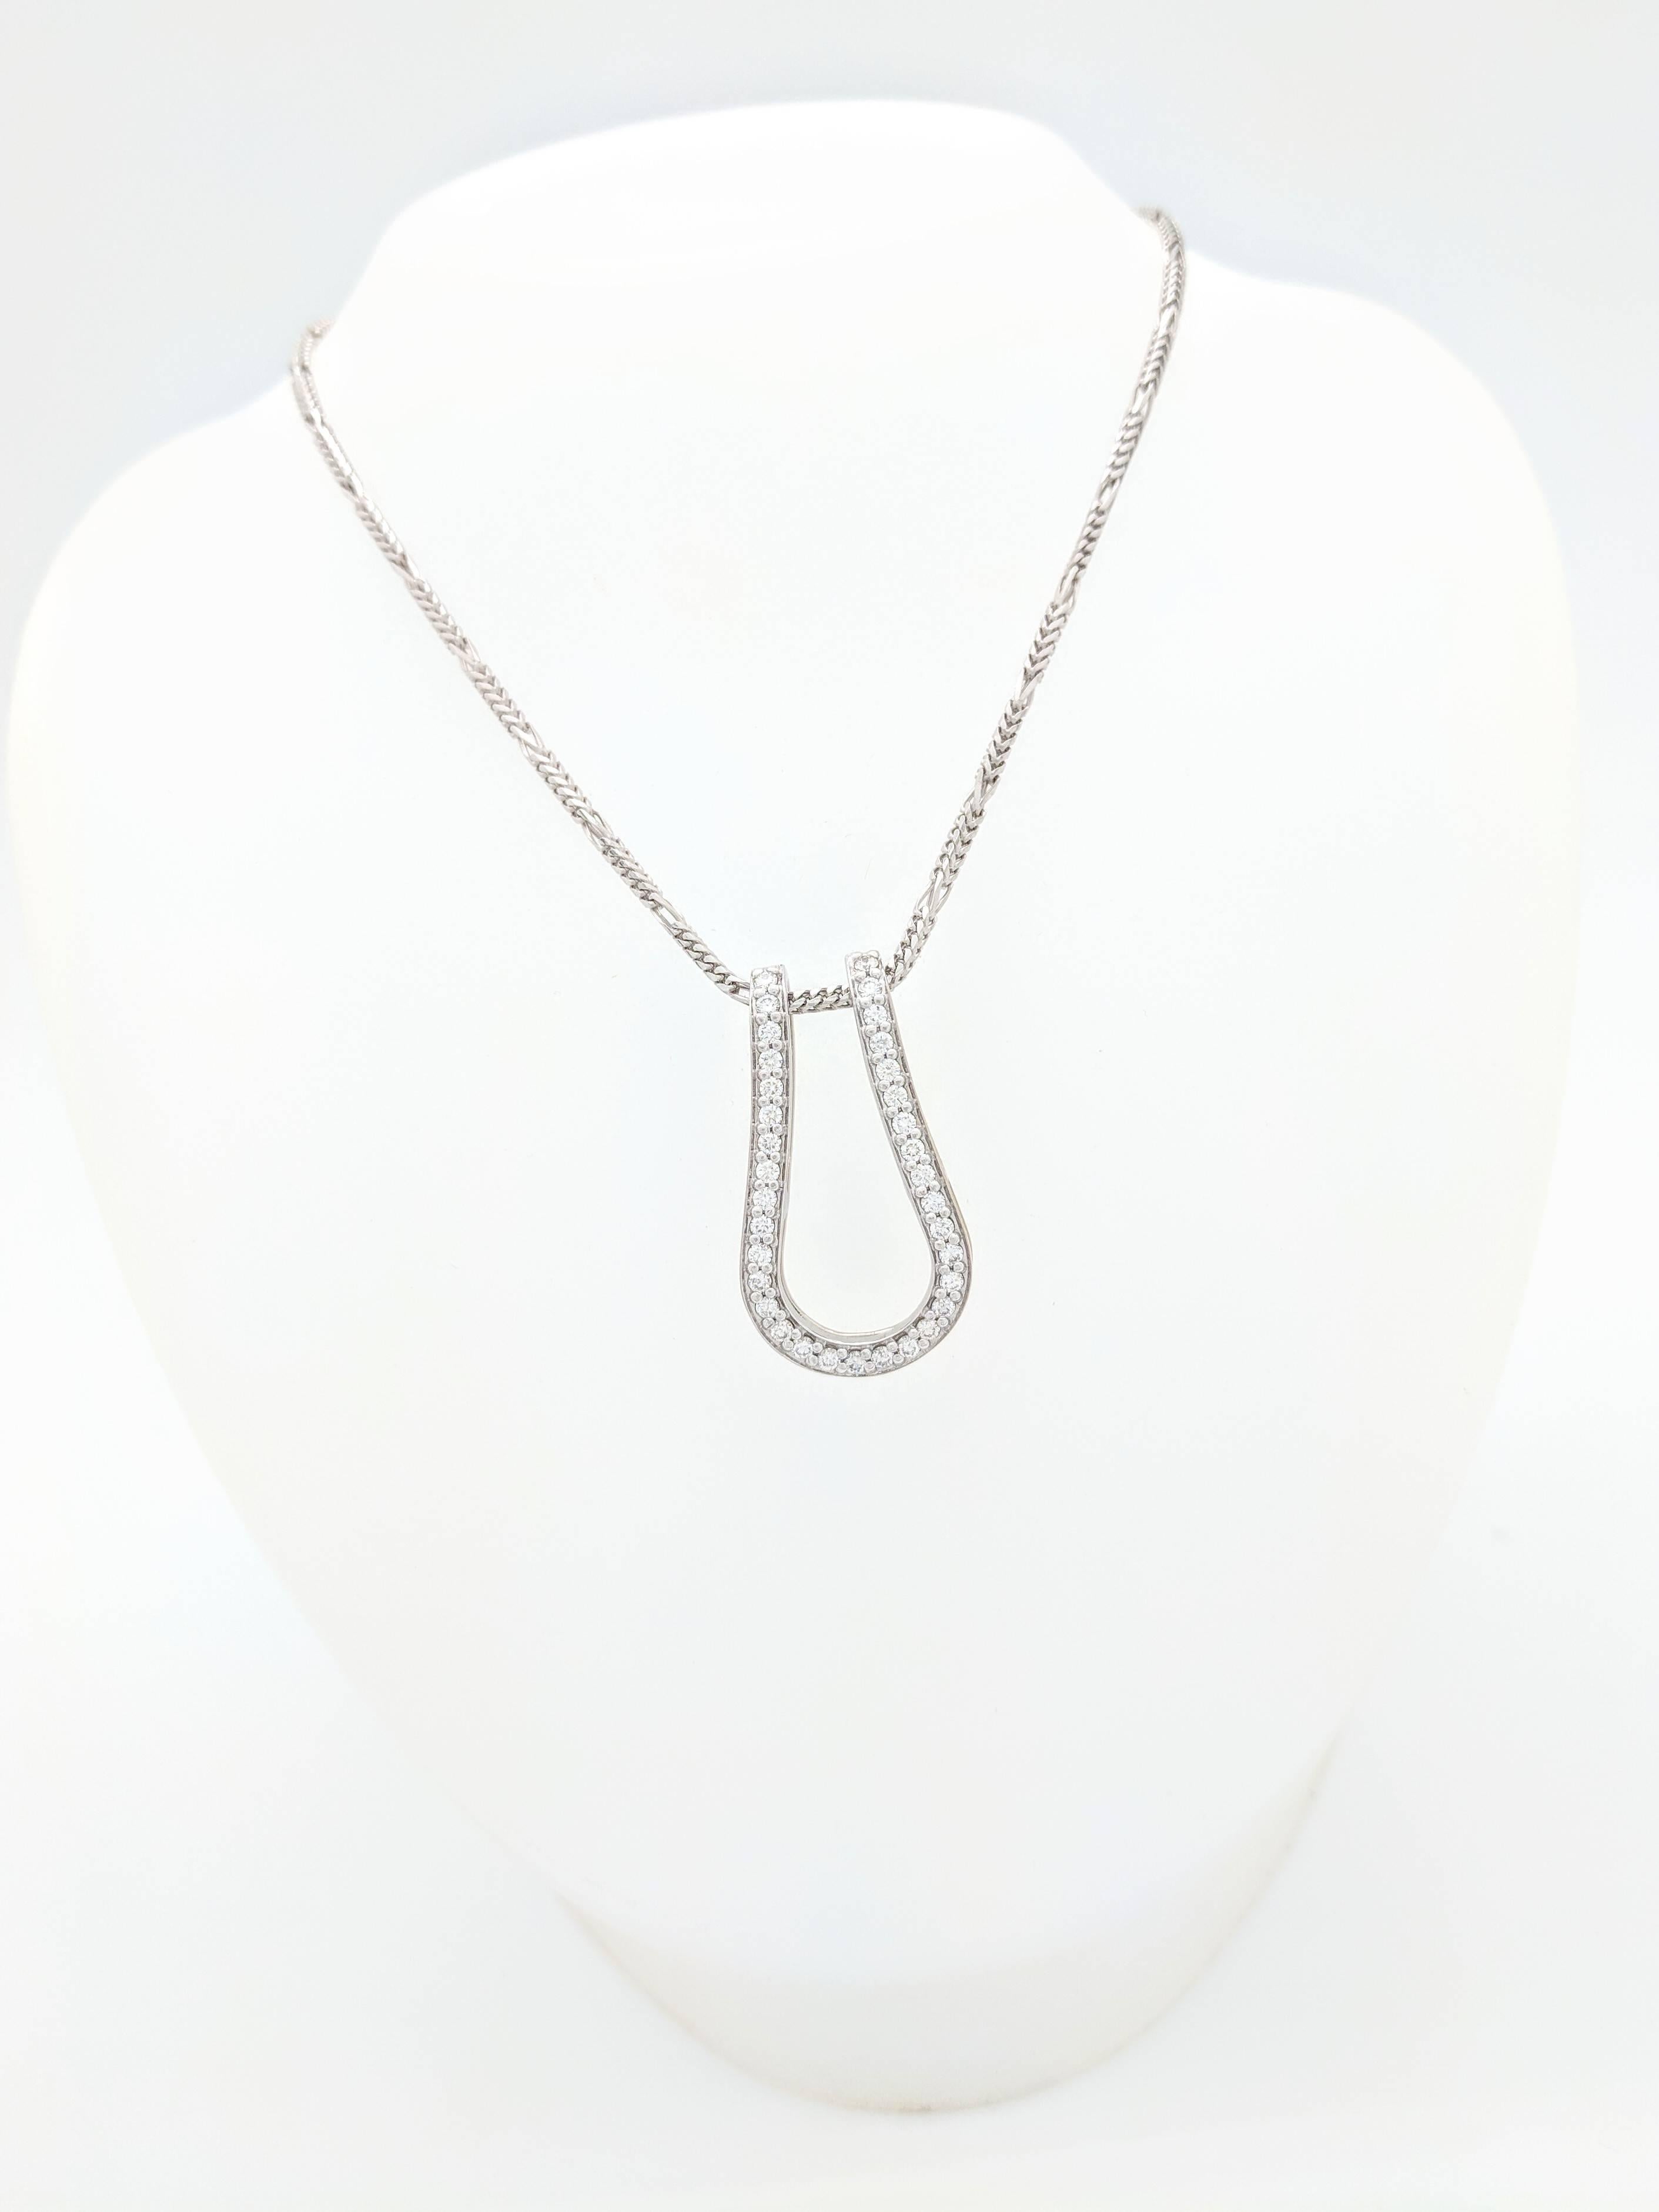 14K White Gold .68ctw Diamond Horseshoe Pendant Necklace 14.6 Grams

You are viewing a gorgeous diamond horseshoe pendant necklace. This pendant is crafted from 14k white gold and offers approximately .68ctw of round natural diamonds. We estimate